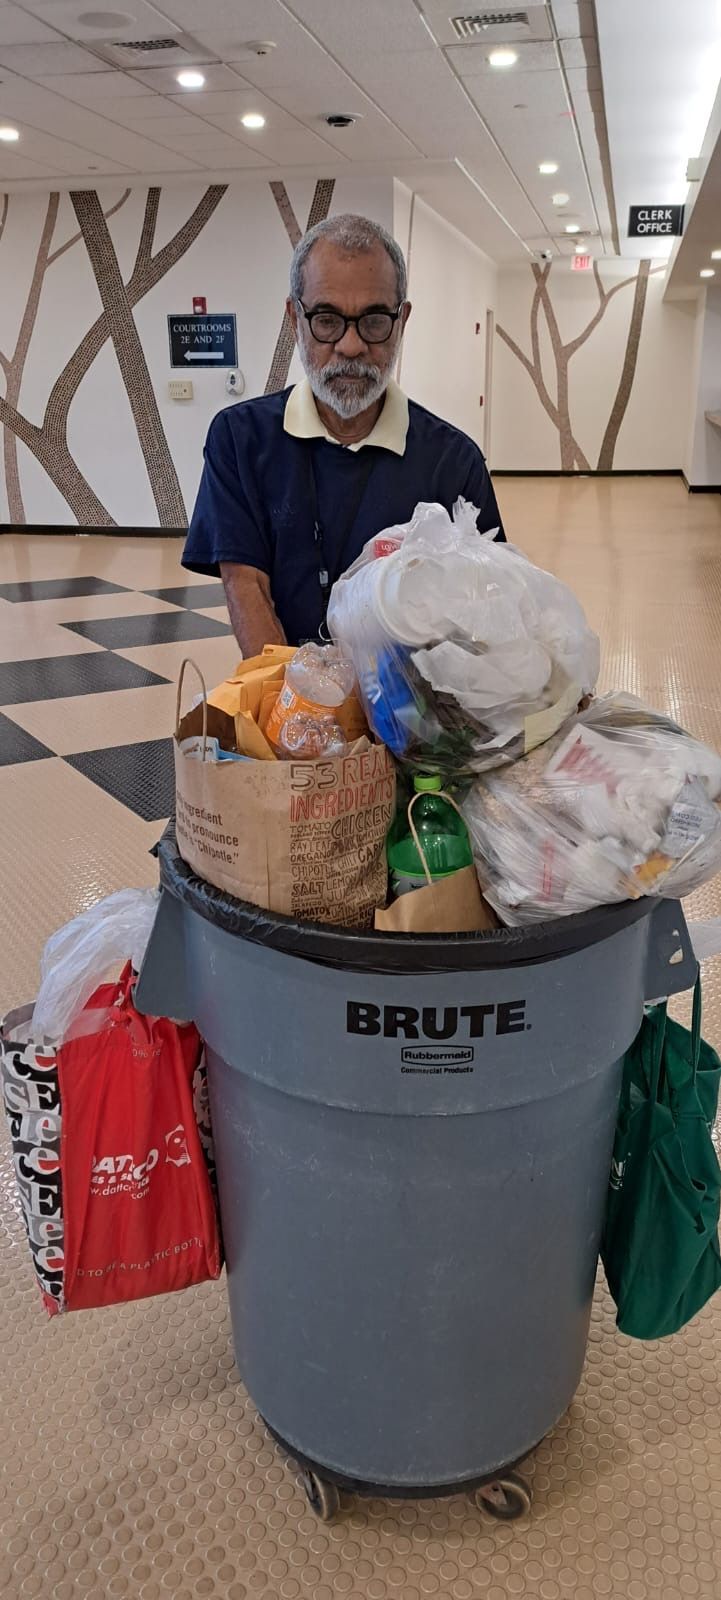 Professional Janitor Collected a Bunch of Trash